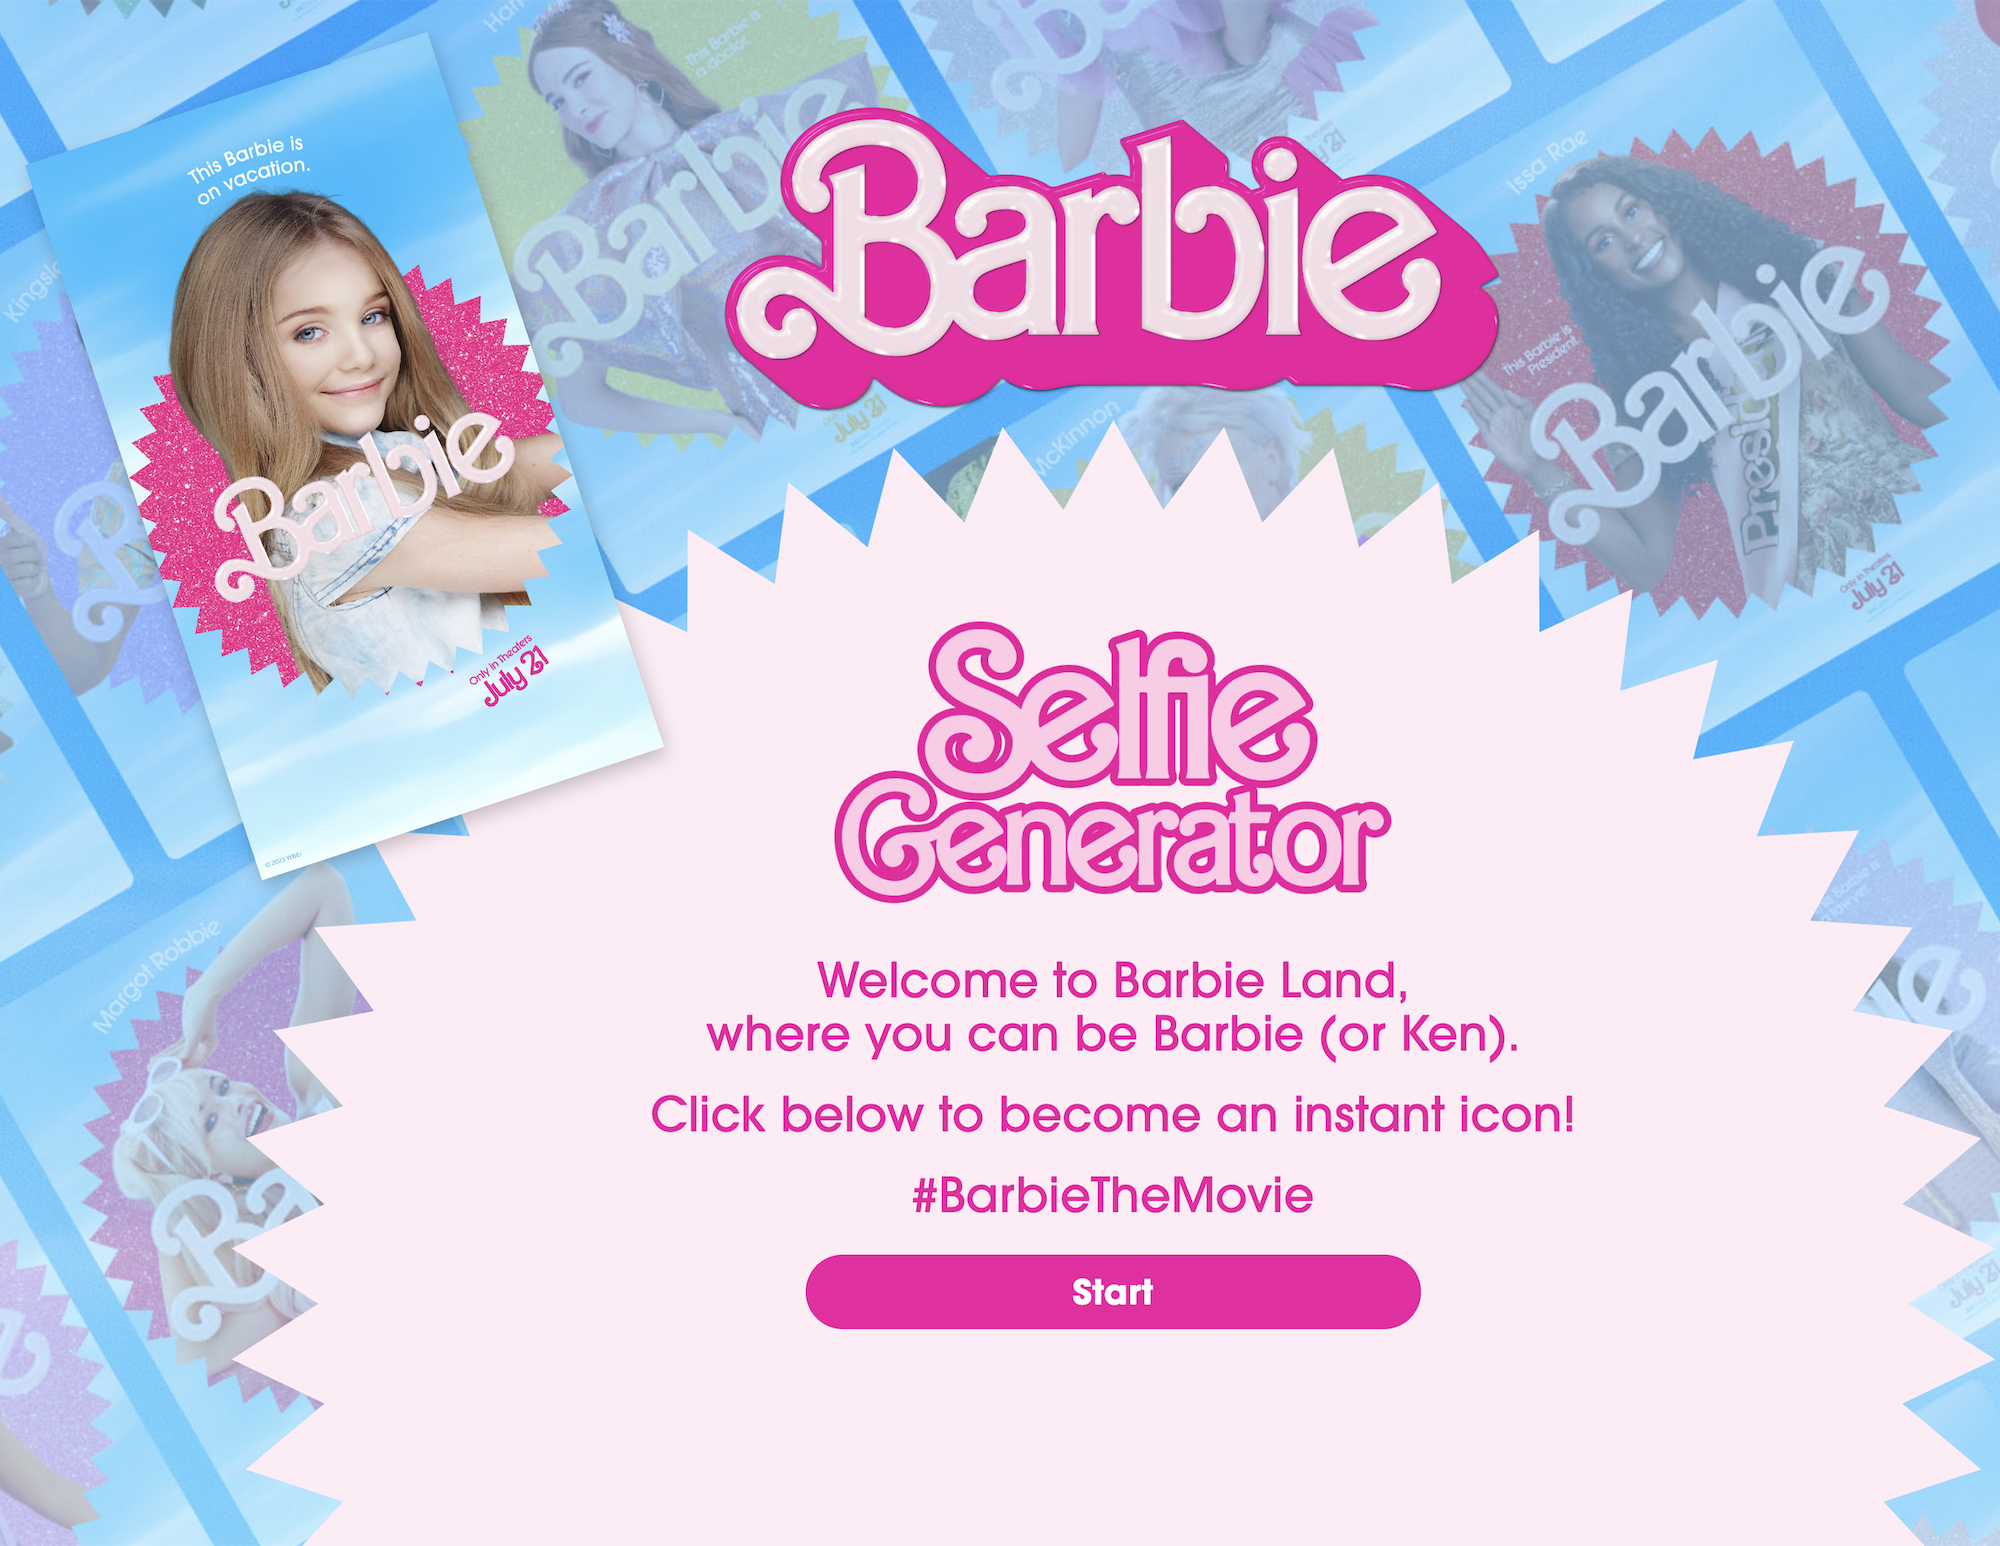 How to use the 'Barbie' selfie generator